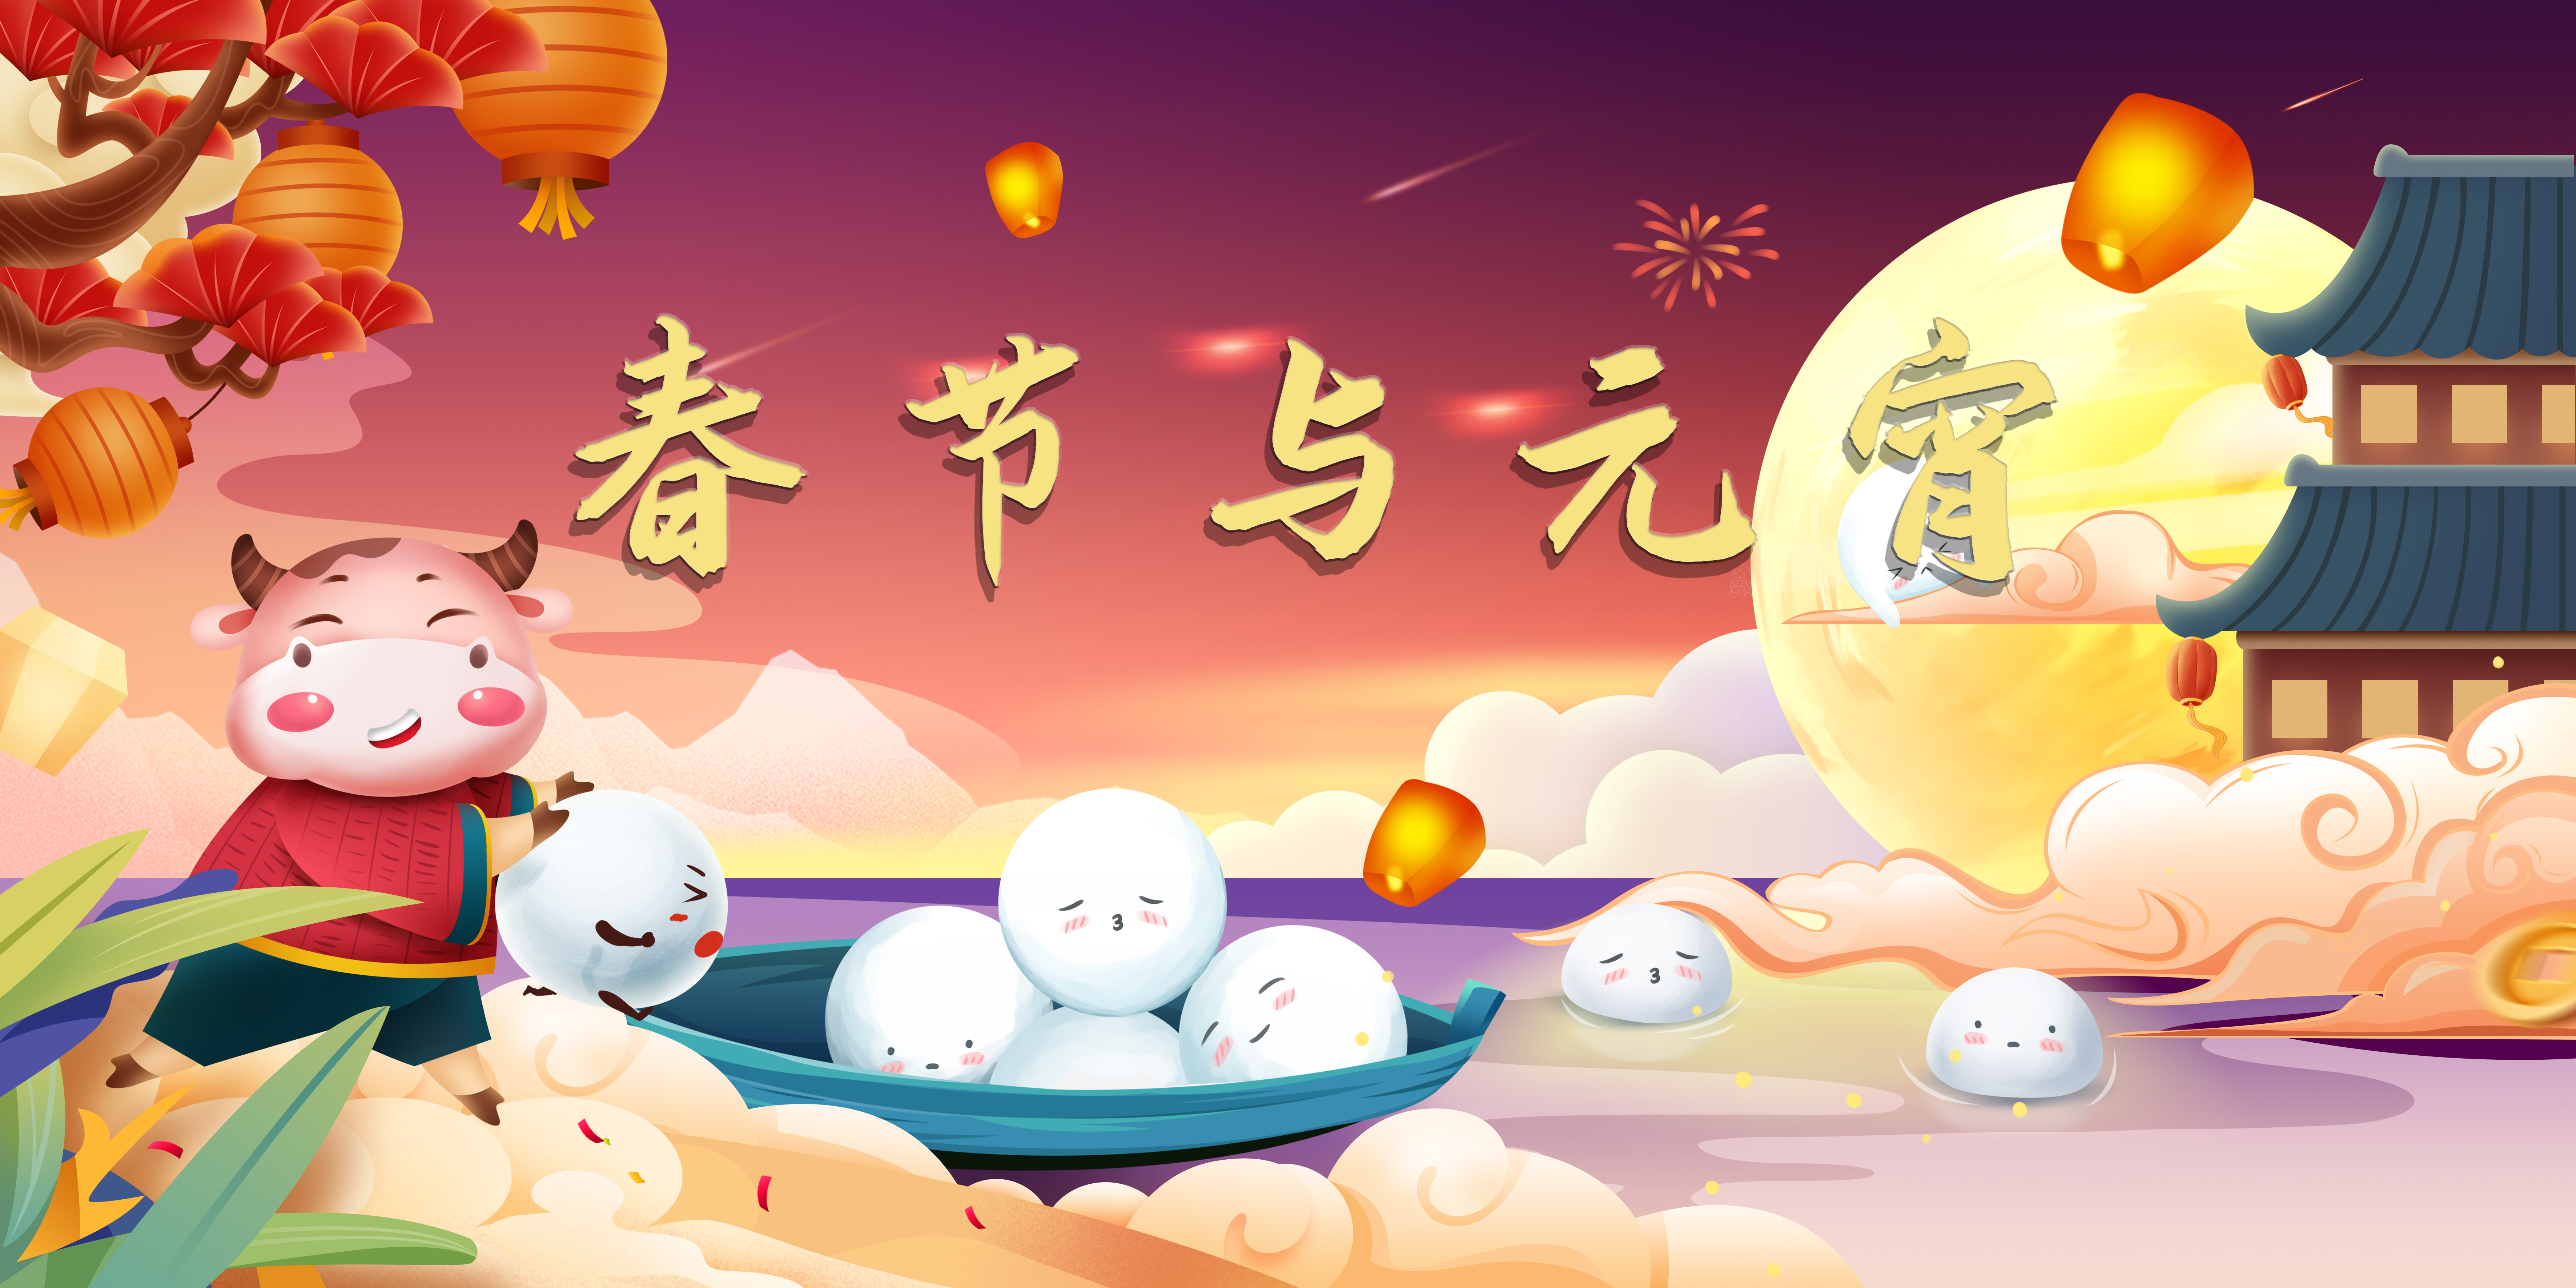 Lecture 1: Spring Festival and Lantern Festival